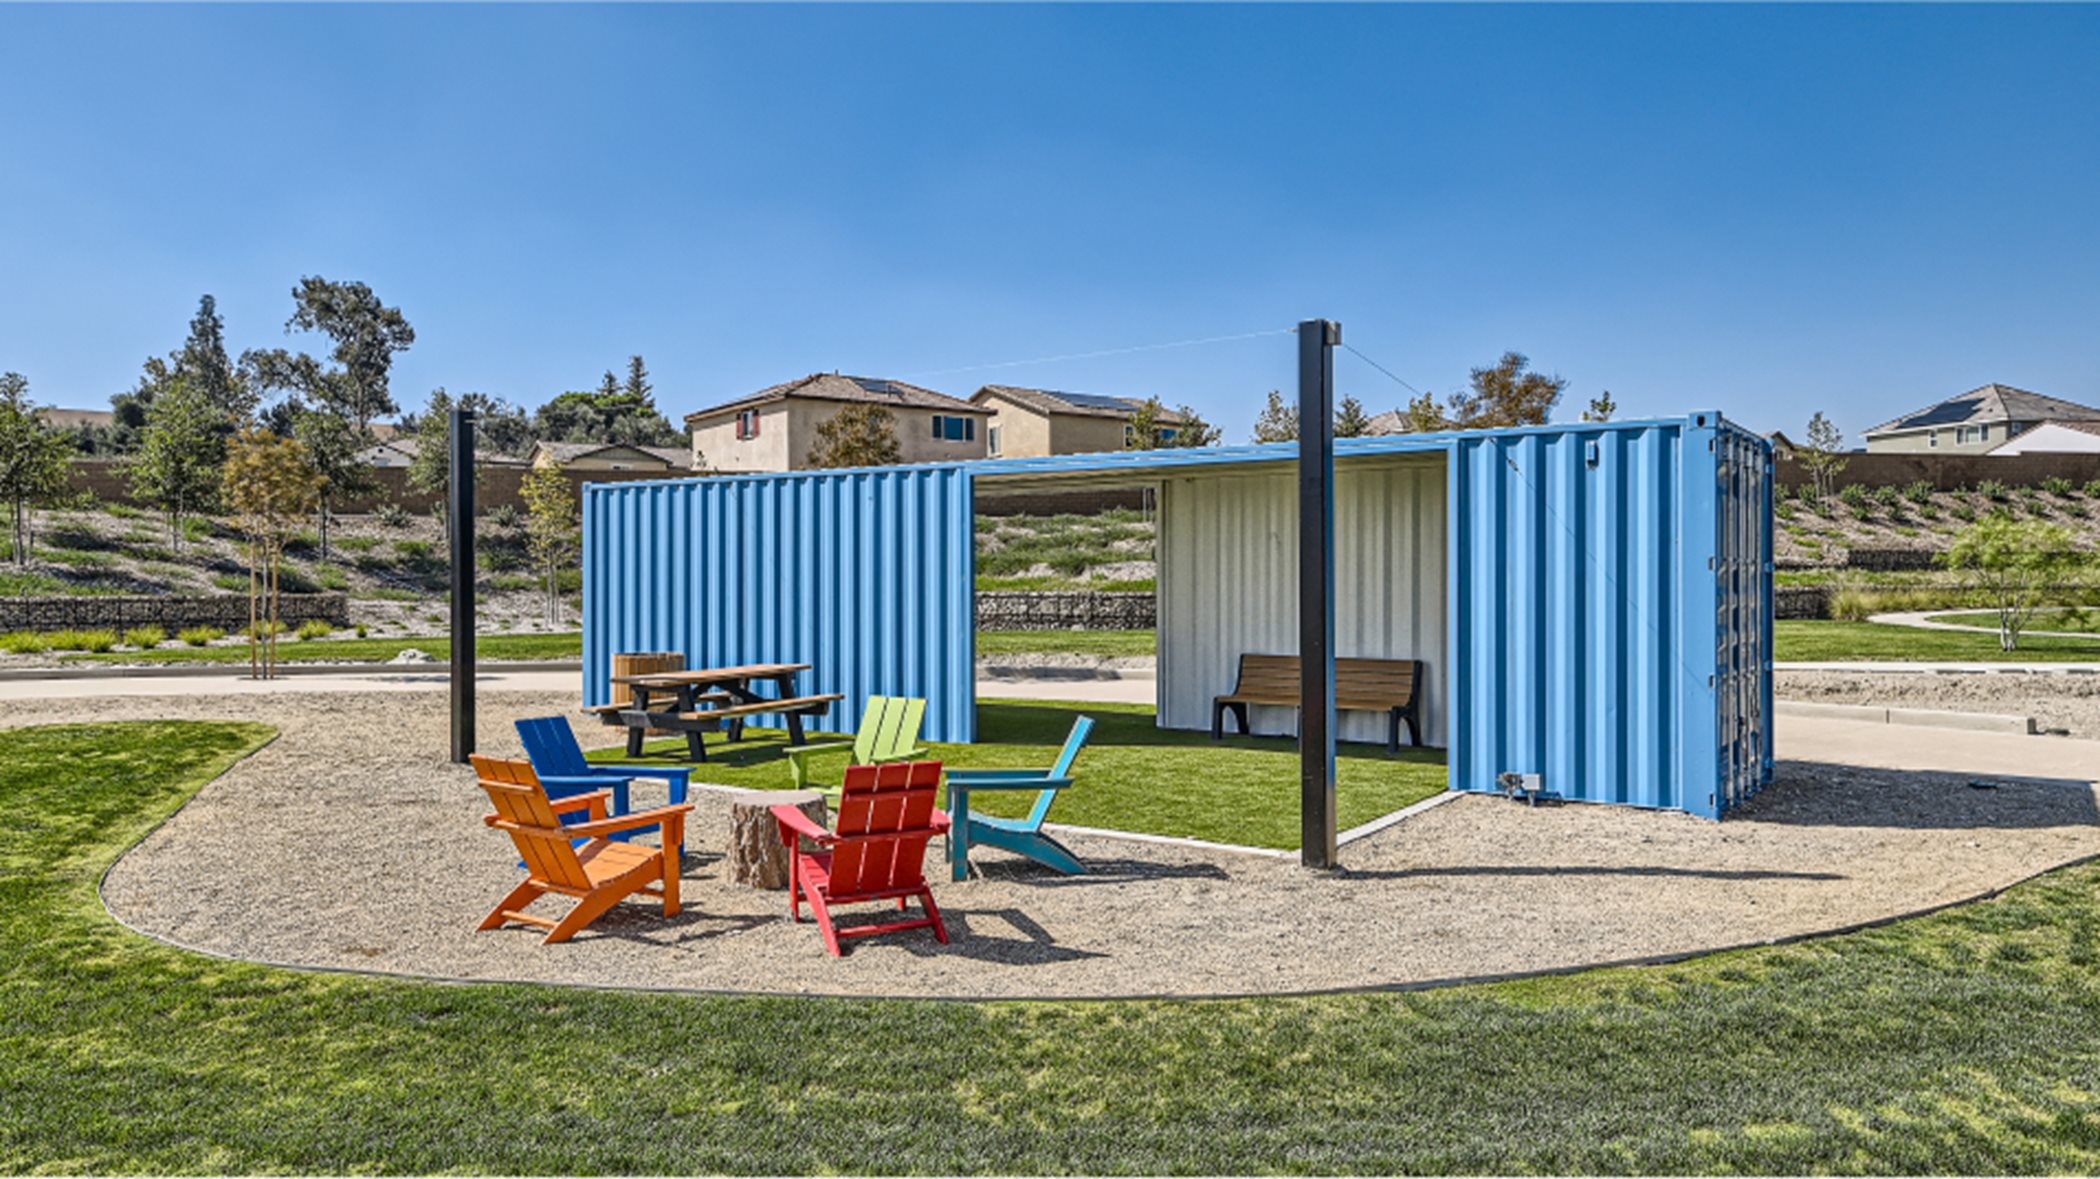 Shaded structures and seating at the River Ranch park